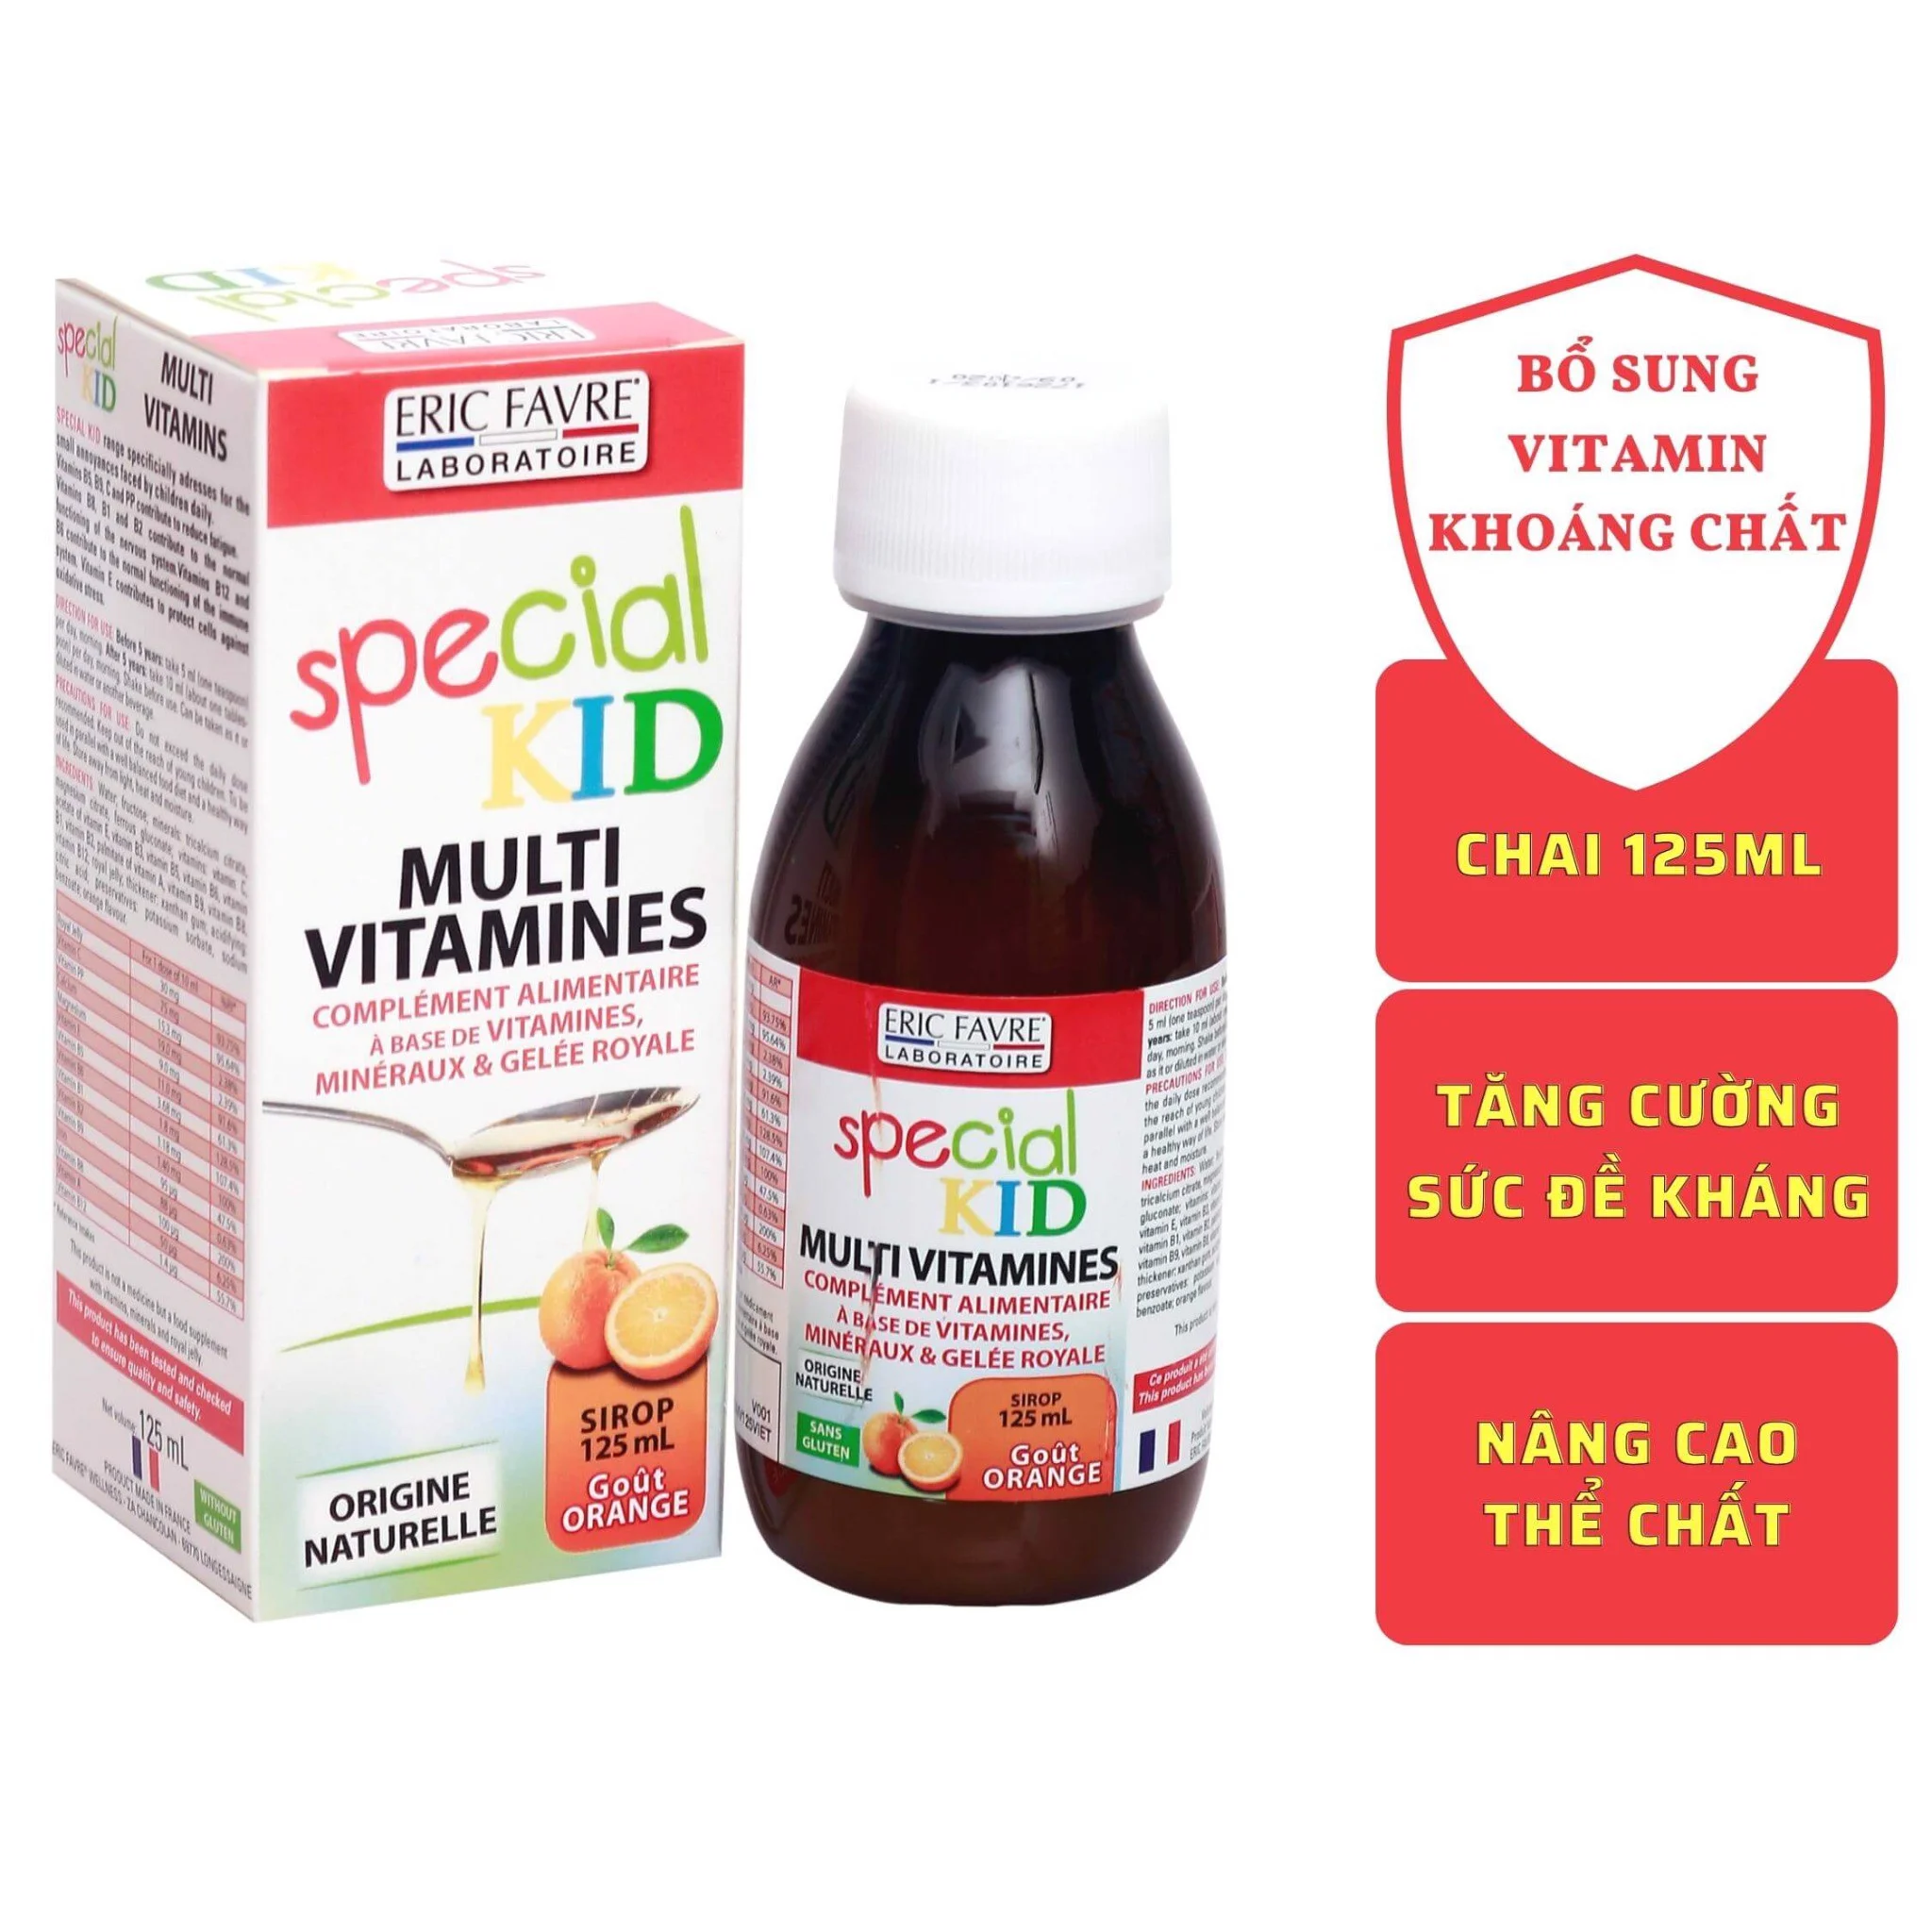 SPECIAL KID MULTIVITAMINES Made in French